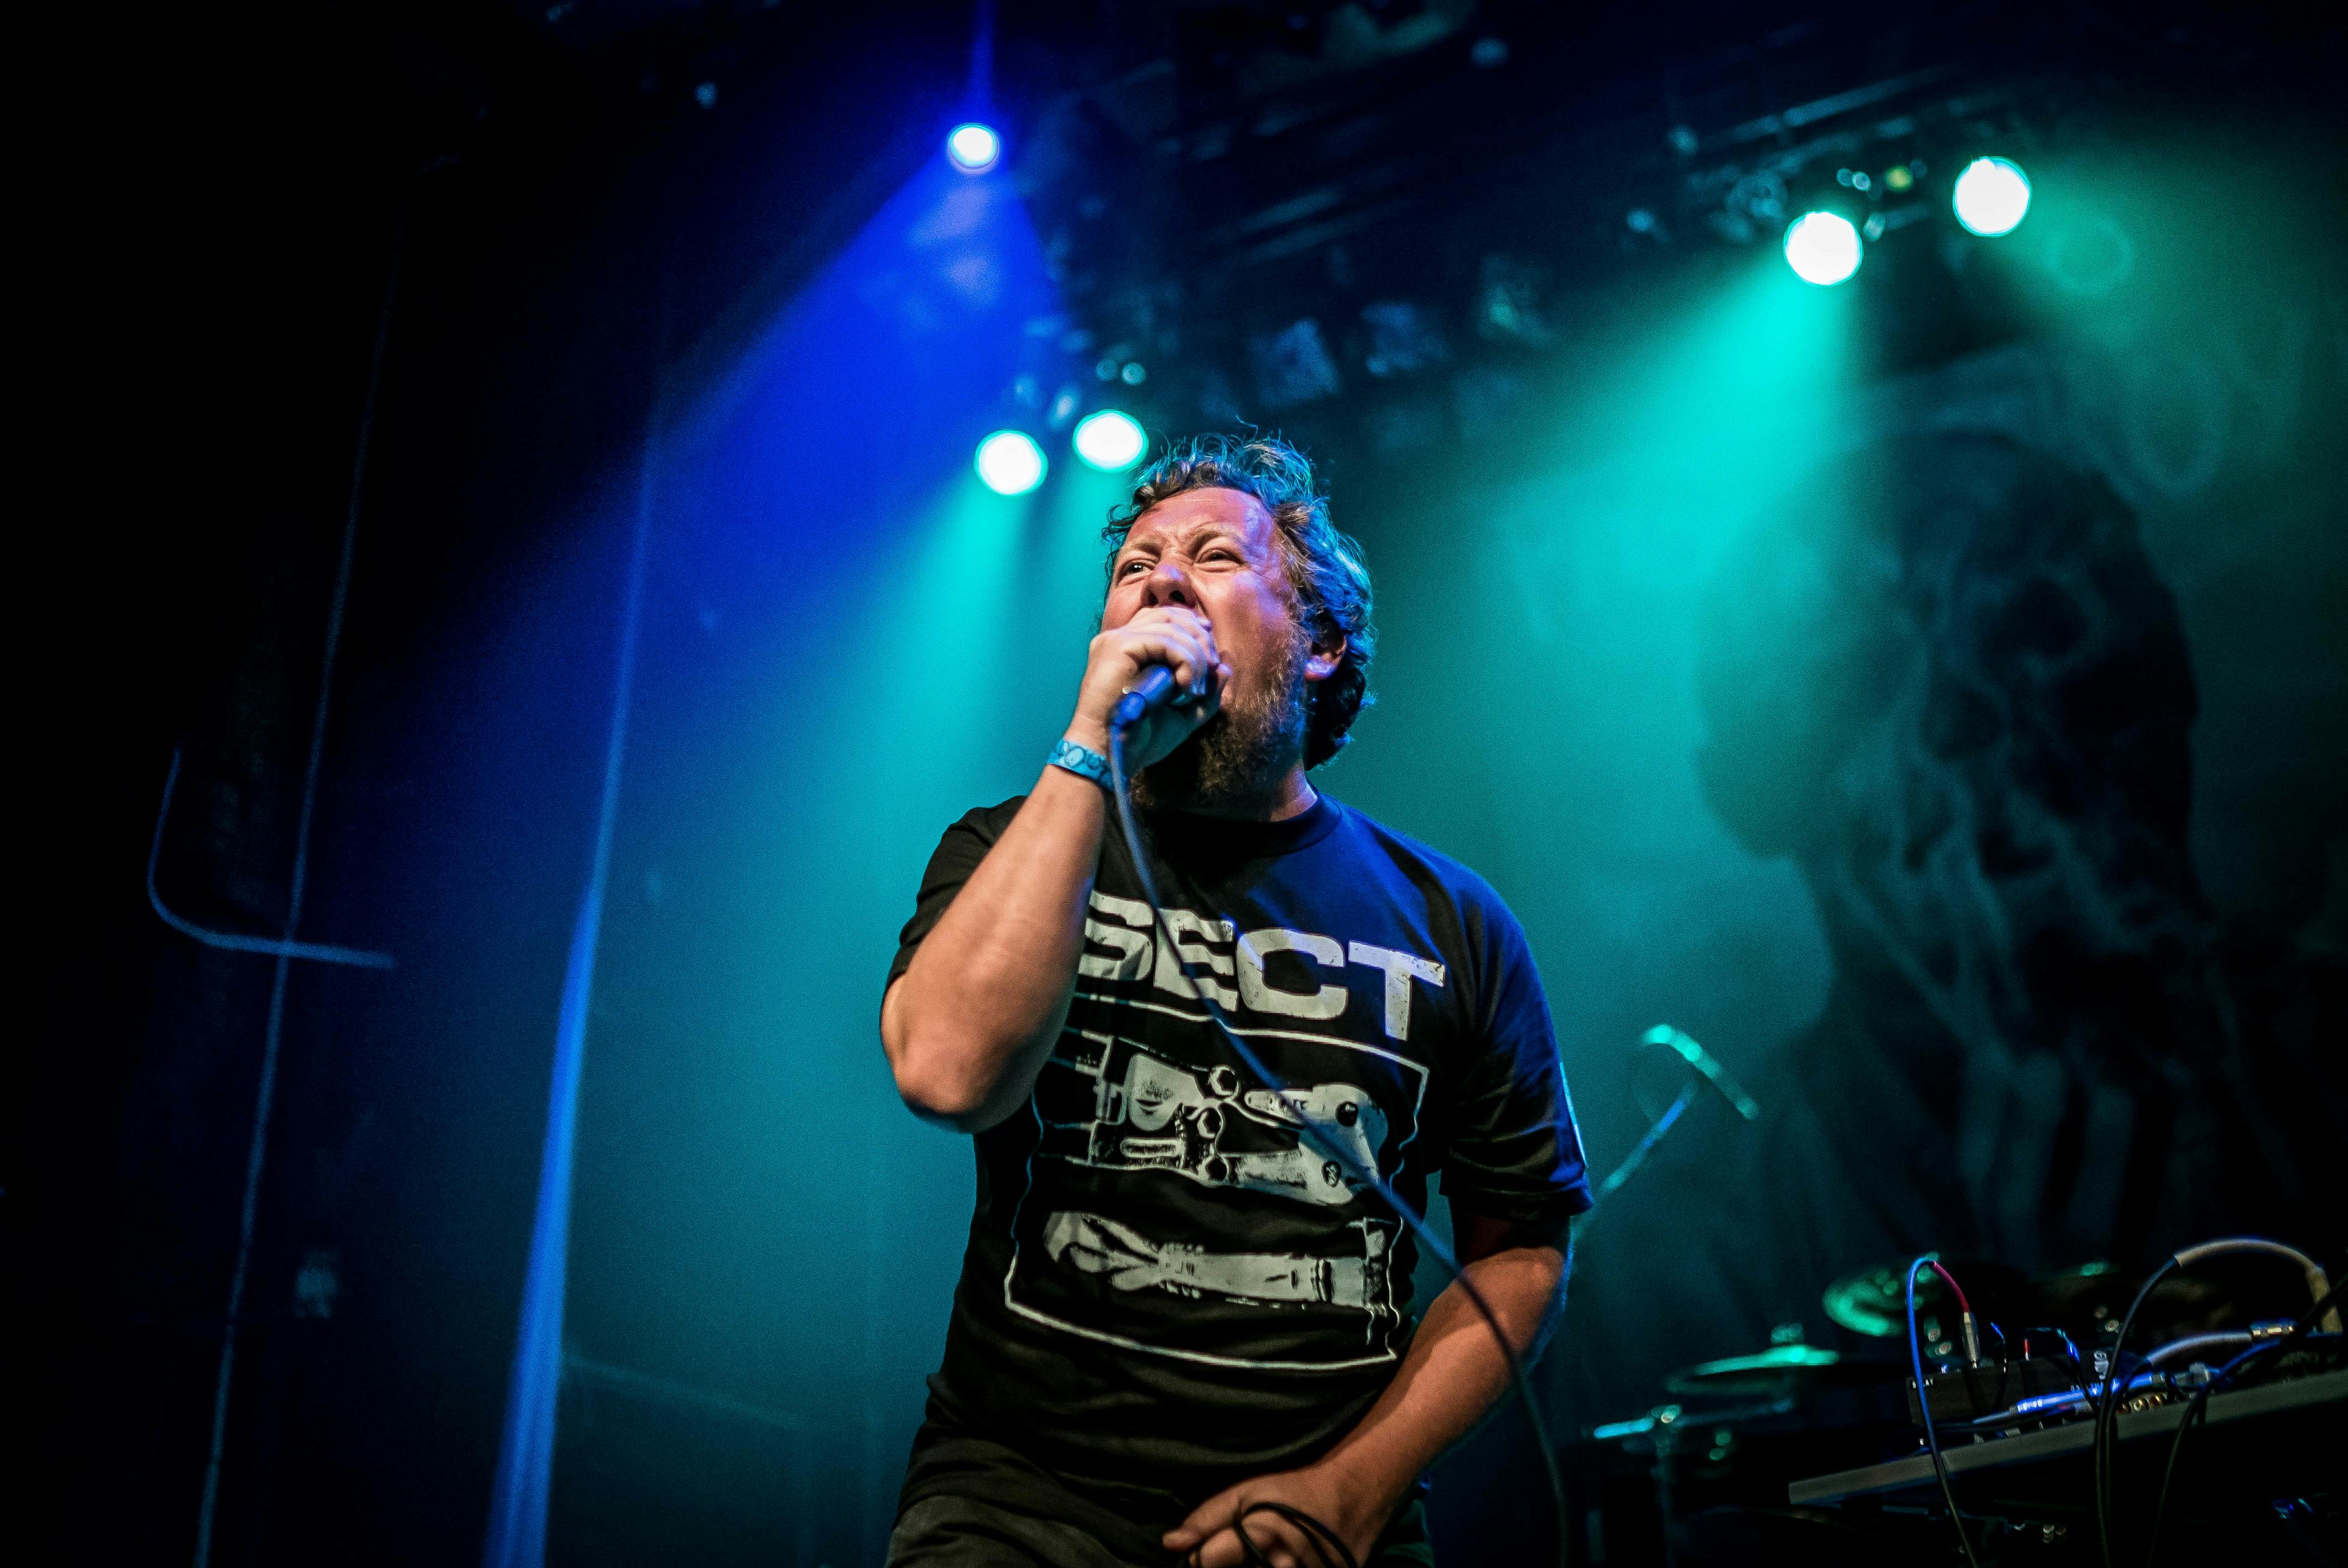 Gallery: Pig Destroyer's Record Release Show with Full of Hell, Despise You, & Sect